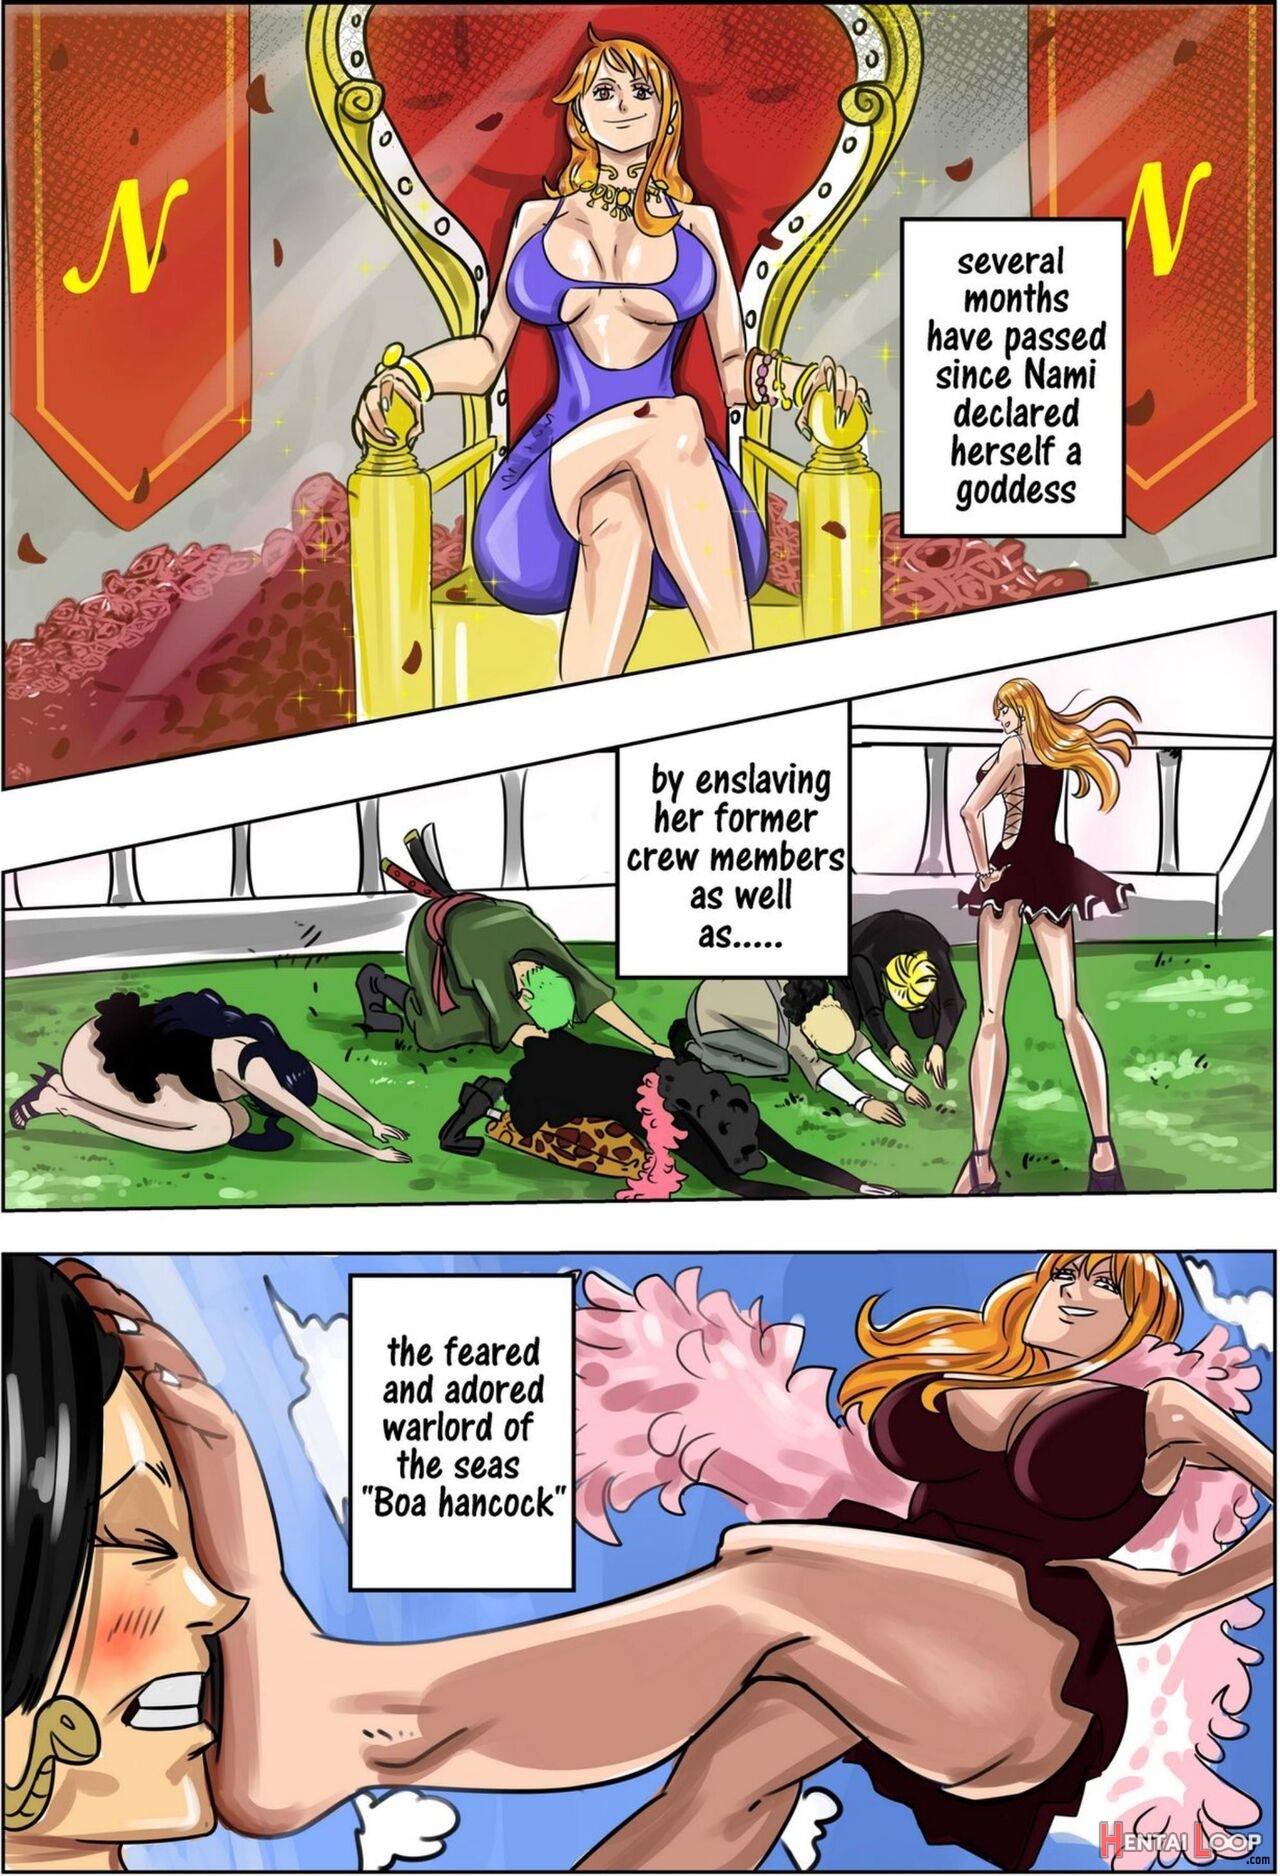 Nami's World 2 page 3